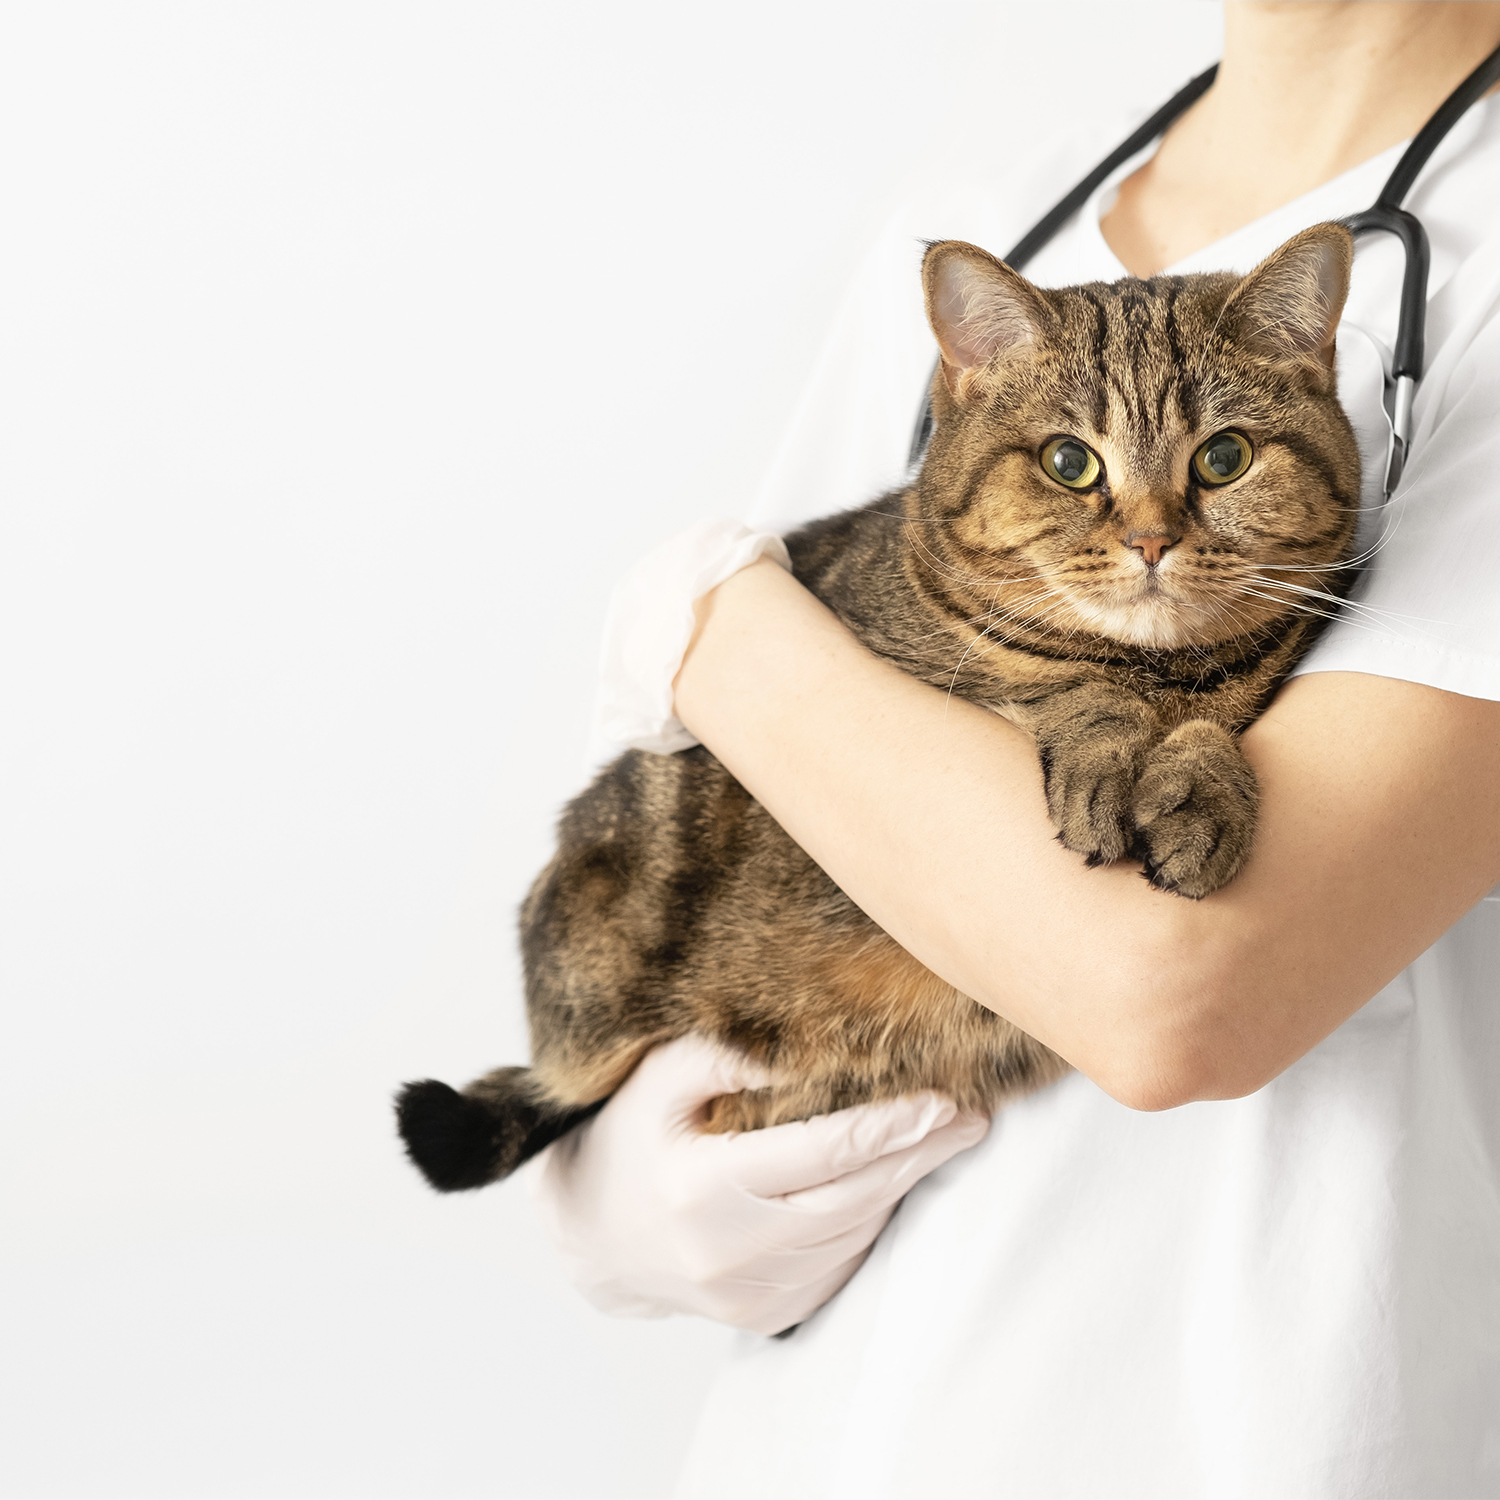 Natural Remedies for Worms in Cats